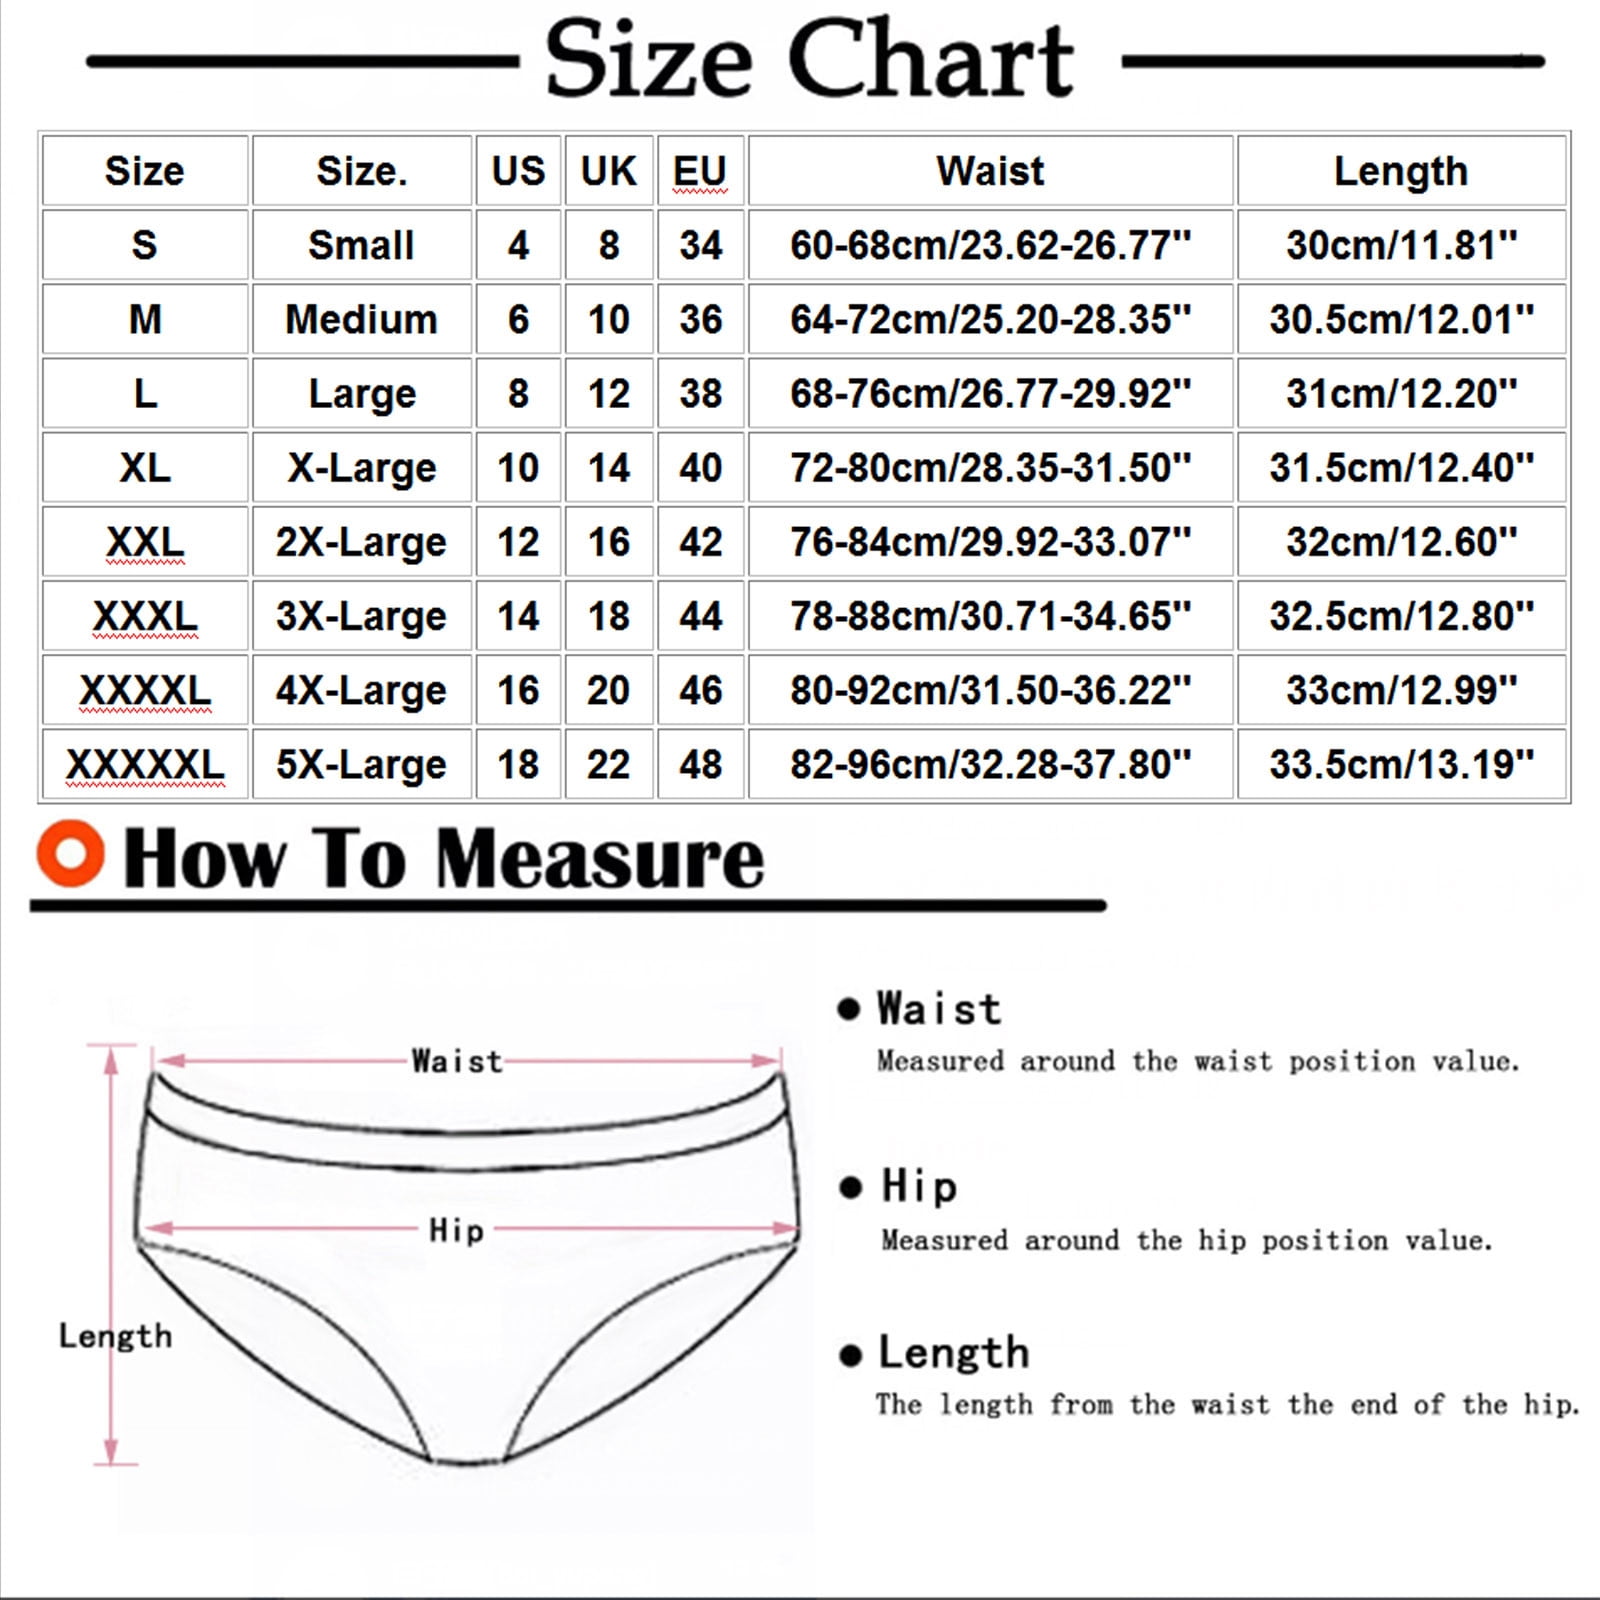 Chiccall Booty Shorts for Women Plus Size Gym Shorts High Waisted Ruffle  Skirted Shorts Workout Rave Dance Bootoms Sexy Mesh Sheer Club Mini Hot  Pants on Clearance 